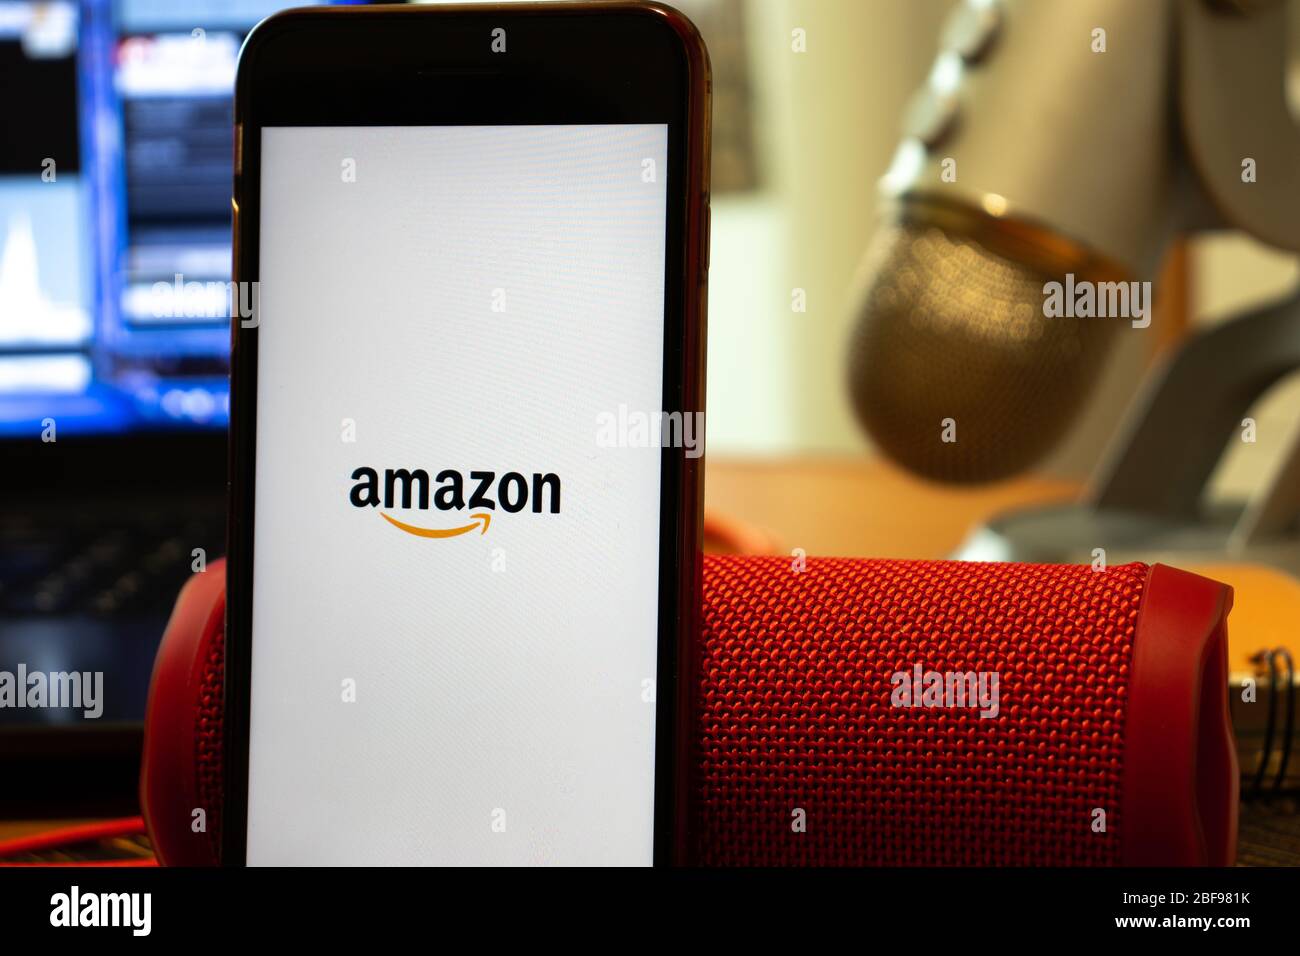 Los Angeles, California, USA - 16 April 2020: Amazon logo on screen close up. App store icon visible on phone display, Illustrative Editorial Stock Photo